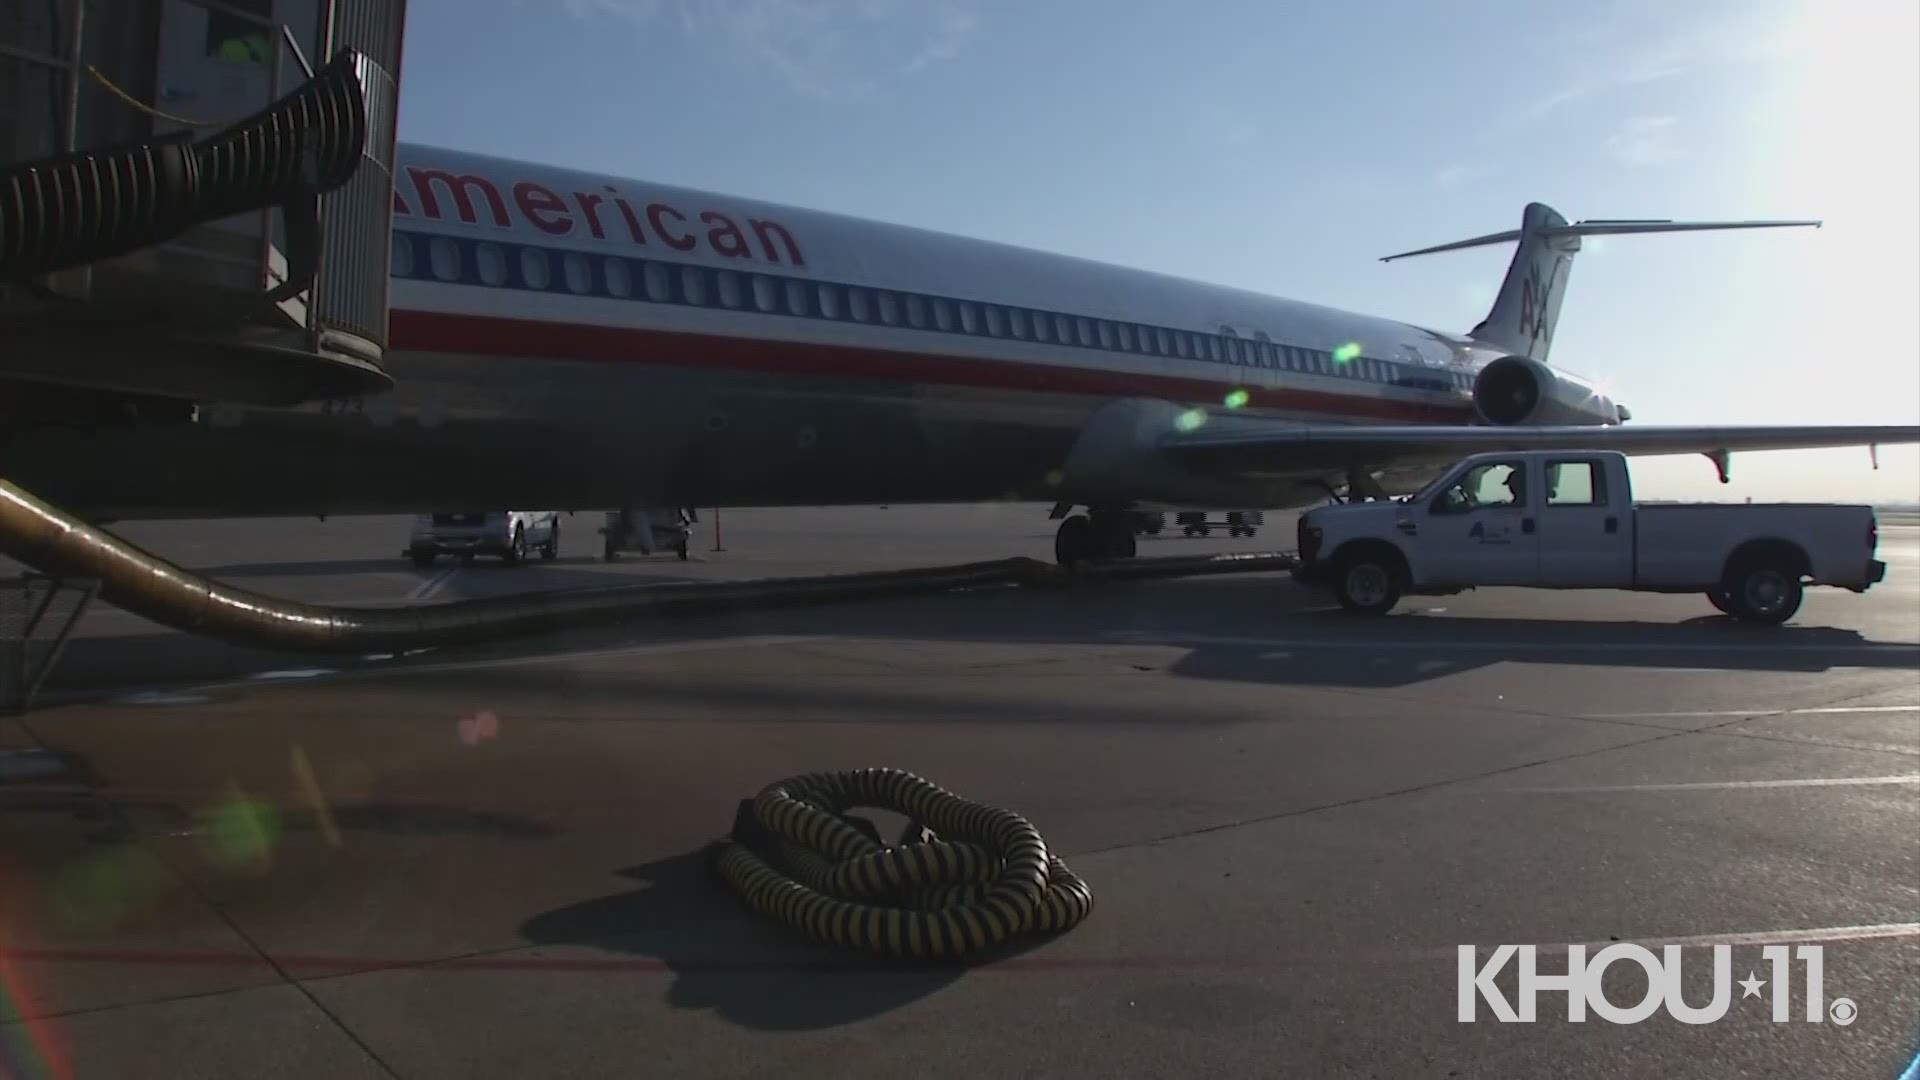 DALLAS -- When Flight 80 pushes back from the gate at 9 a.m. on Wednesday, it will mark the end of an era for American Airlines. The Chicago O’Hare-bound jet will be the last MD-80 in passenger service for American after a 36-year run. -- http://bit.ly/2kiY0Y3